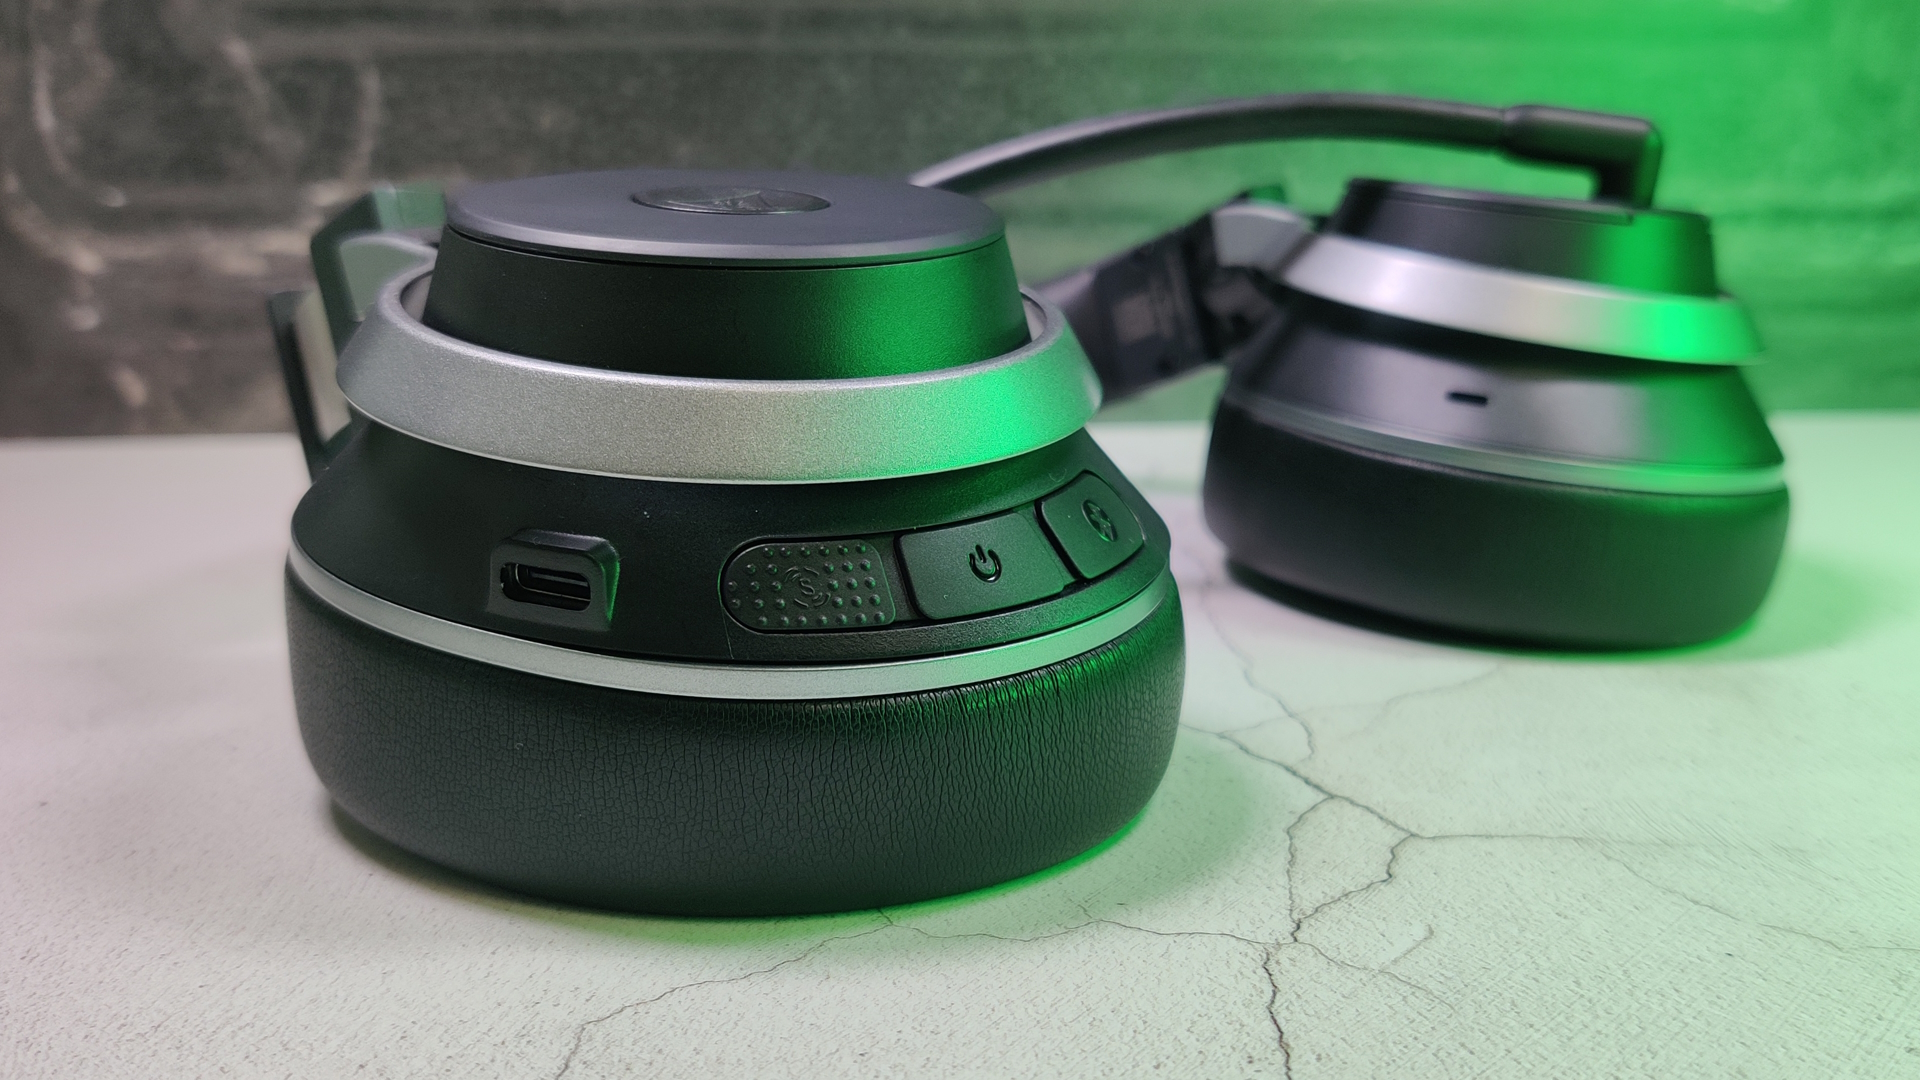 The turtle beach stealth pro buttons